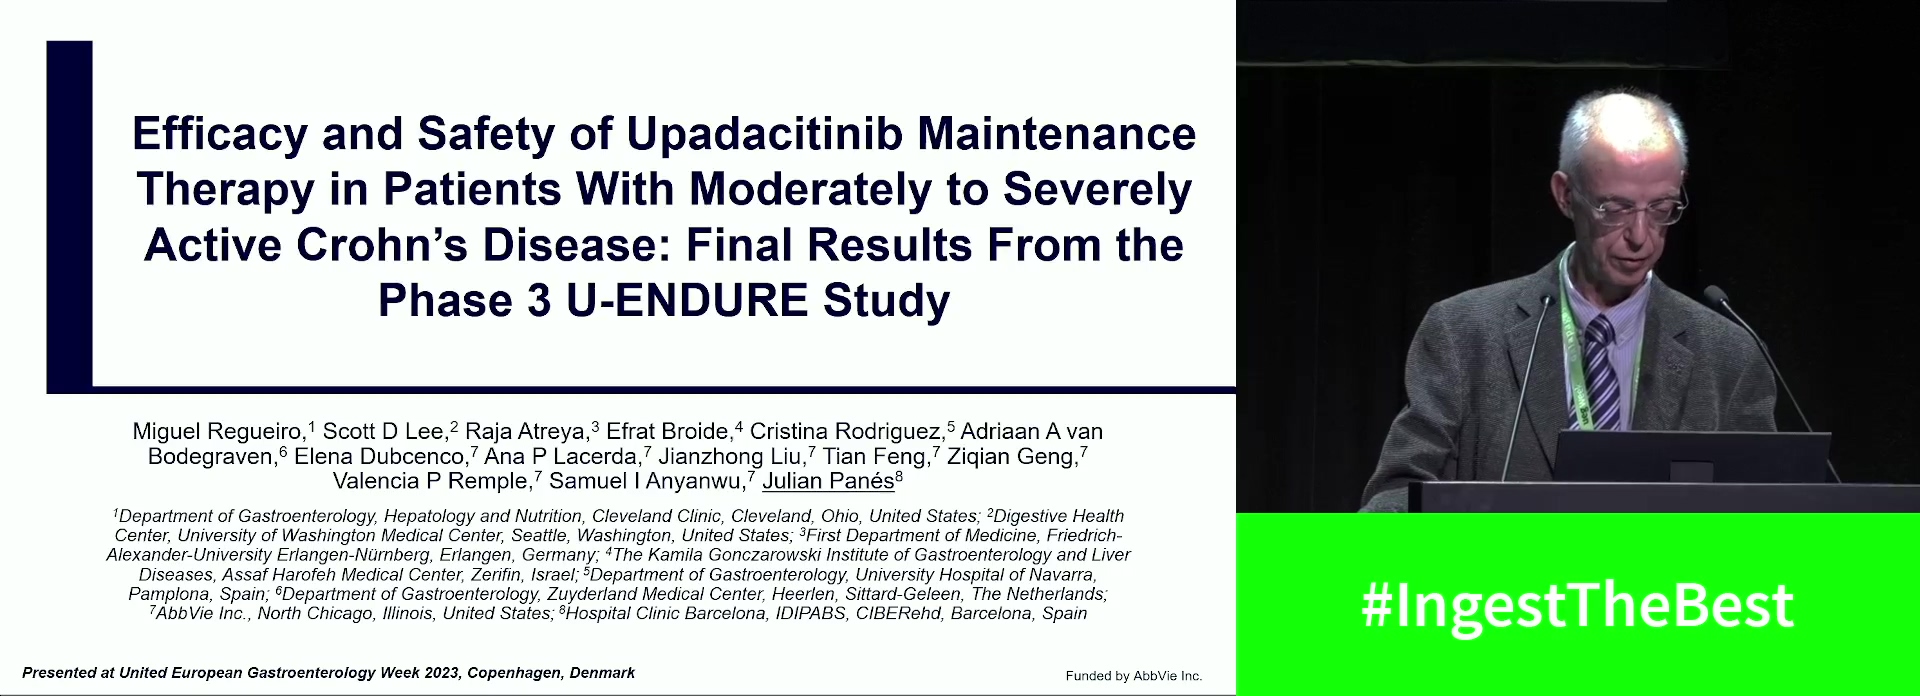 EFFICACY AND SAFETY OF UPADACITINIB MAINTENANCE THERAPY IN PATIENTS WITH MODERATELY TO SEVERELY ACTIVE CROHN’S DISEASE: FINAL RESULTS FROM THE PHASE 3 U-ENDURE STUDY